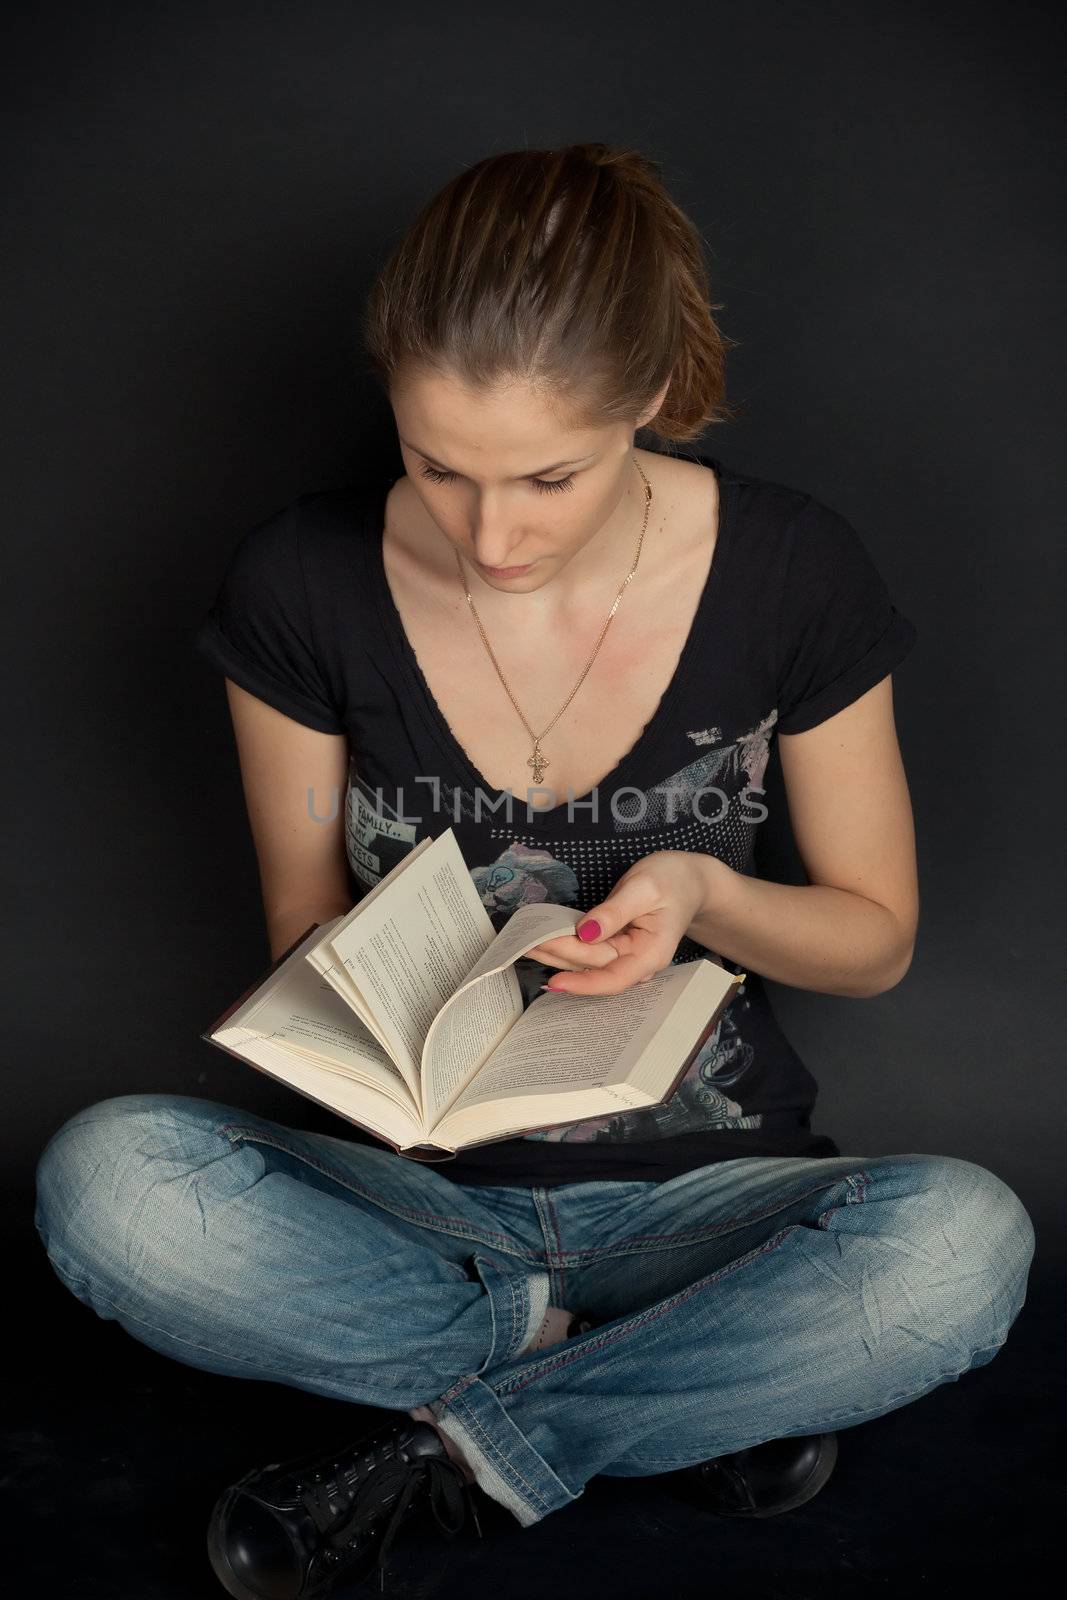 A girl sits and leafs through a book